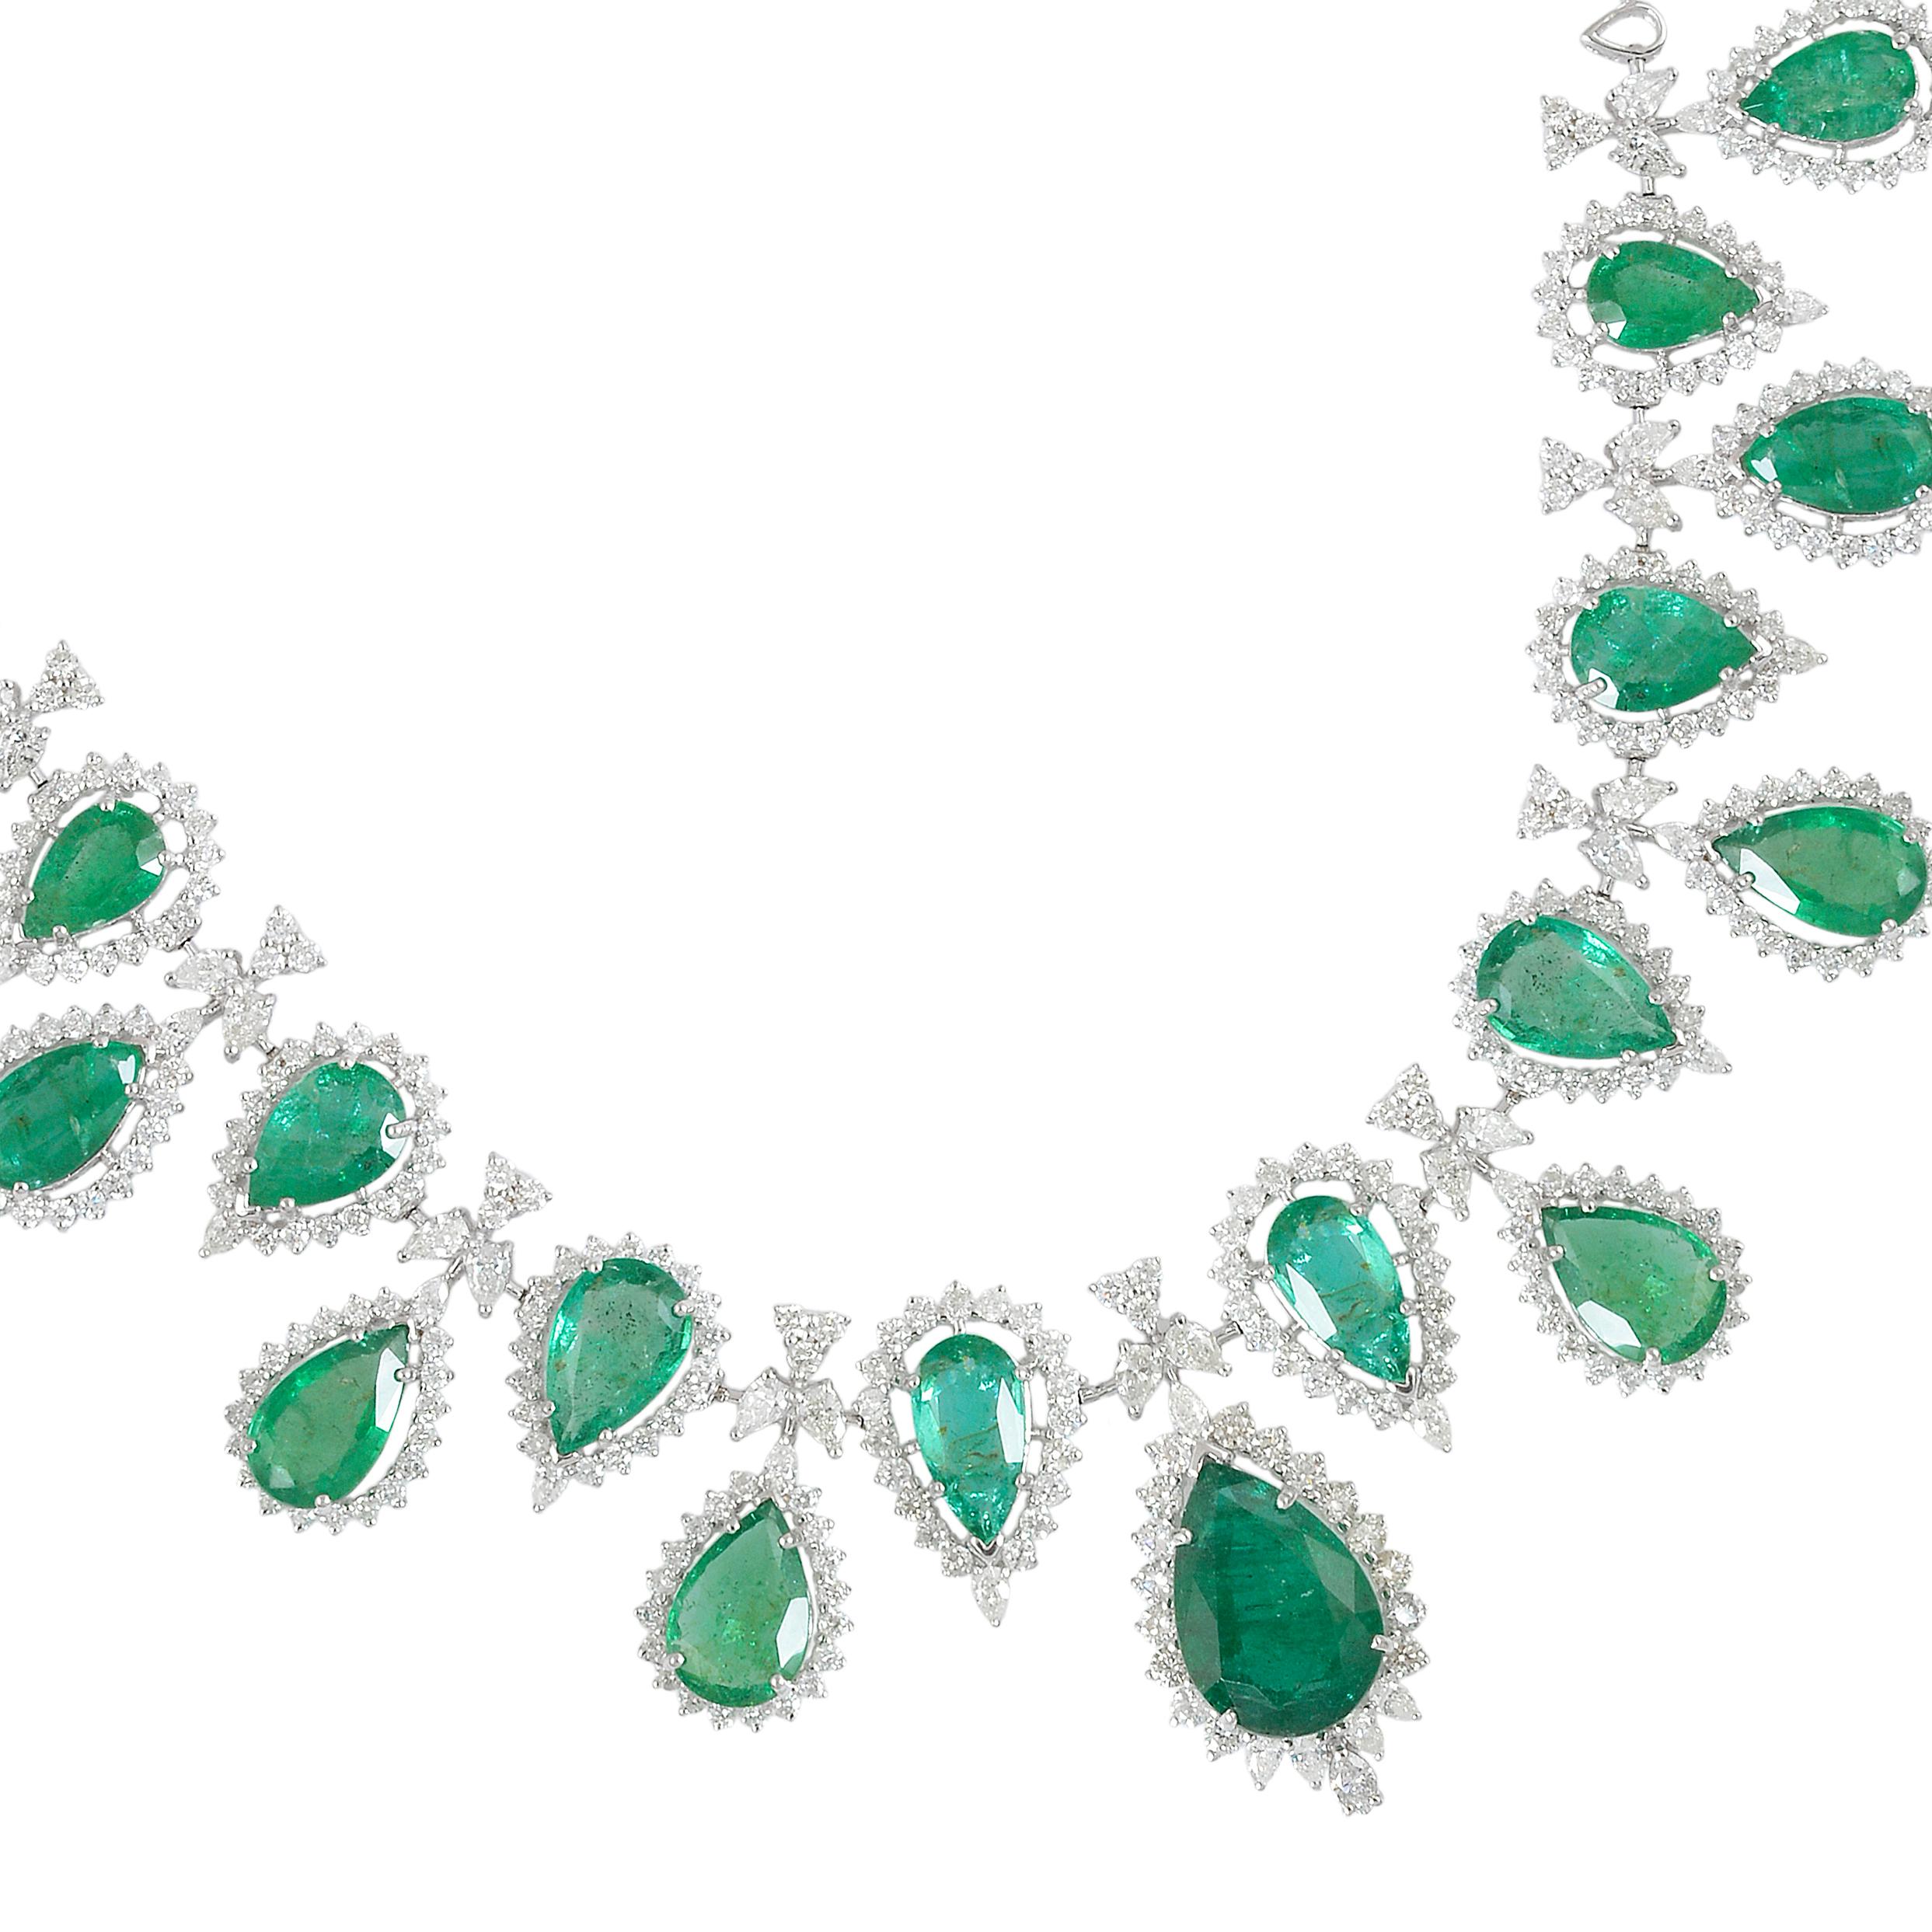 This exquisite necklace features a pear-shaped emerald gemstone accentuated with diamonds, all set in 18 karat white gold. Meticulously handcrafted with exceptional attention to detail, this piece of fine jewelry radiates elegance, sophistication,